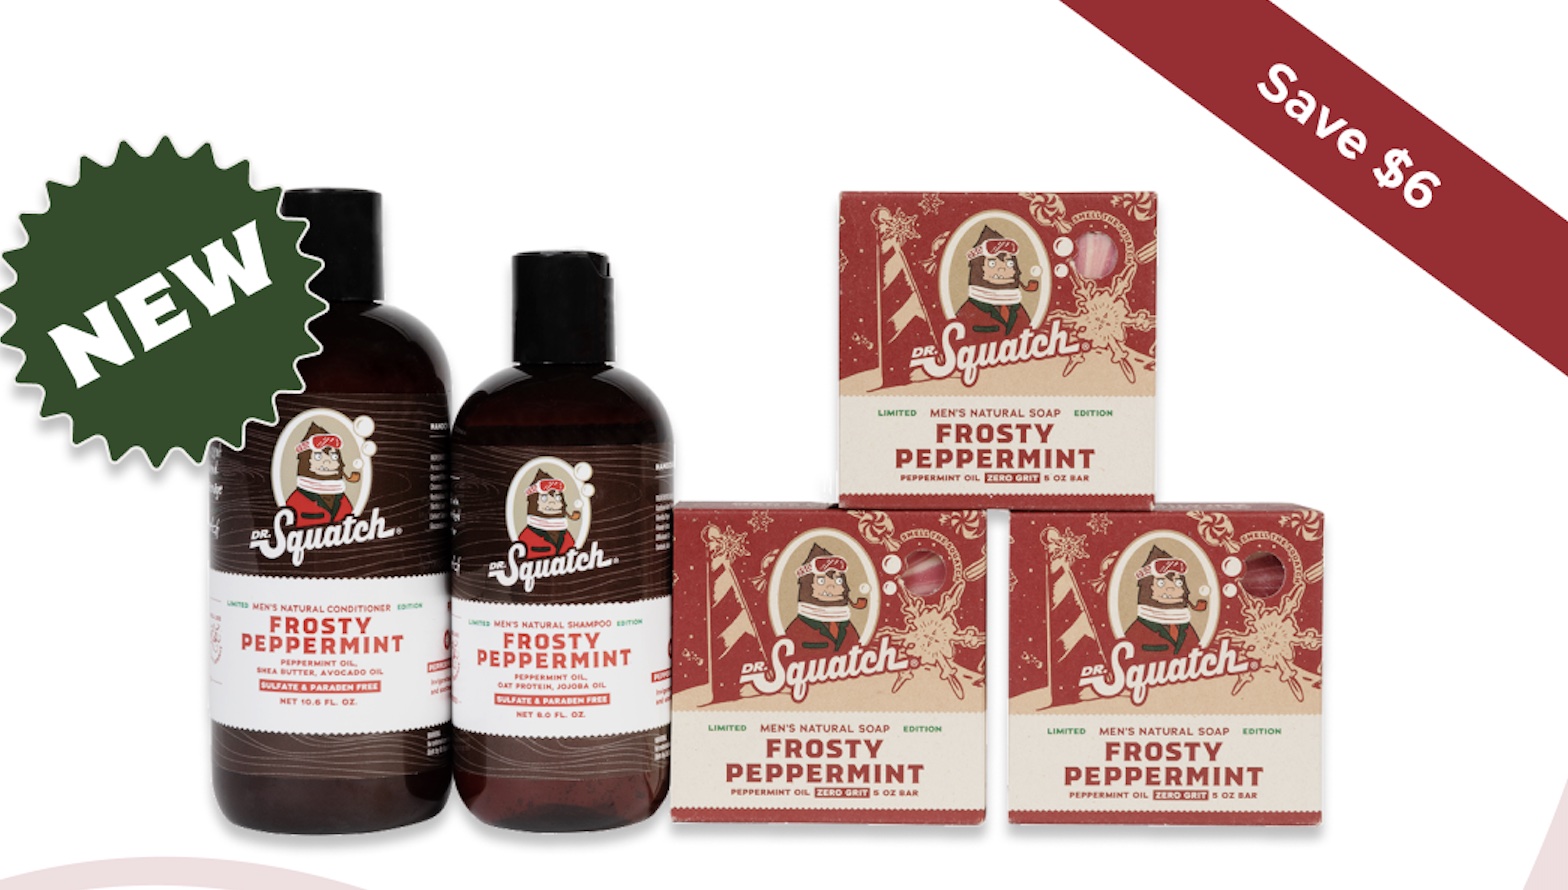 Dr. Squatch Frosty Peppermint Shampoo + Conditioner Limited Edition RARE!!!